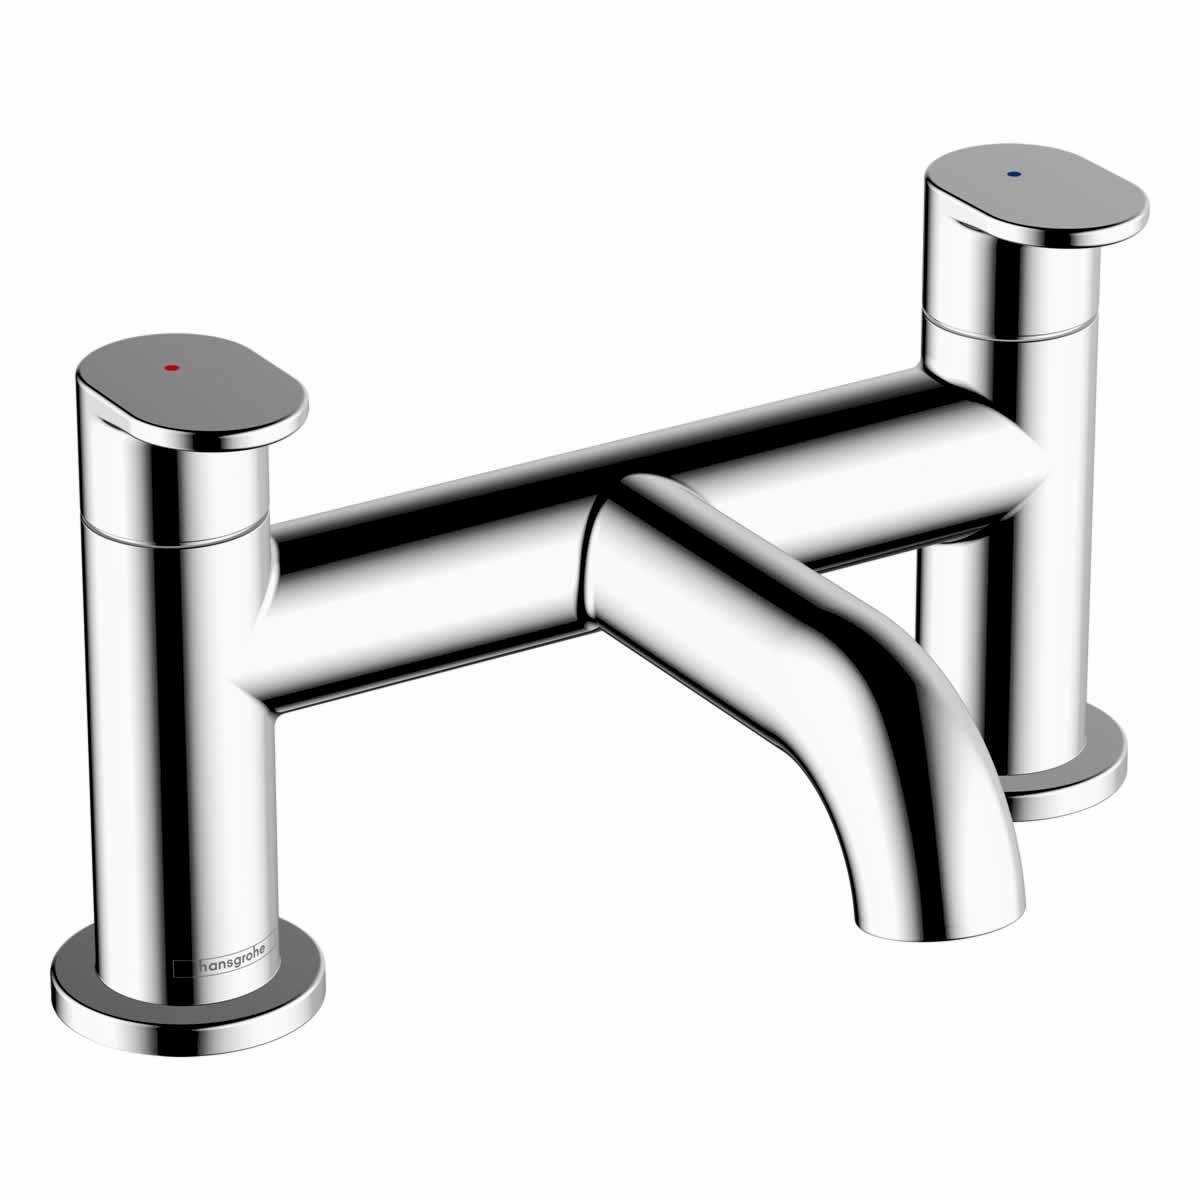 hansgrohe Vernis Blend Deck Mounted Bath Mixer Tap in Chrome - 71442000